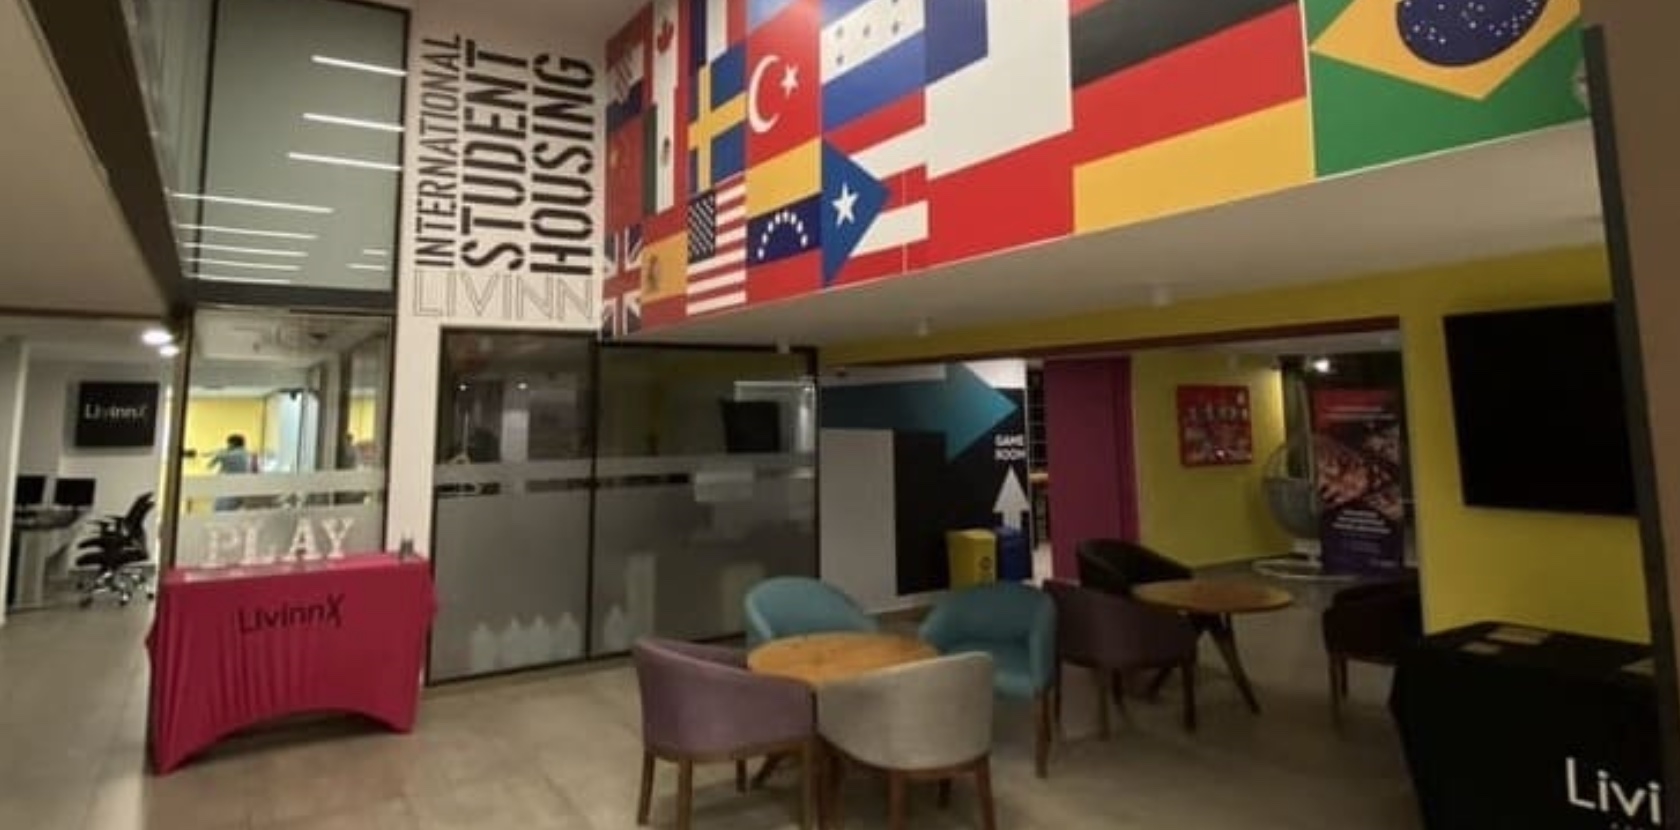 Lobby of student housing in Santiago, Chile.